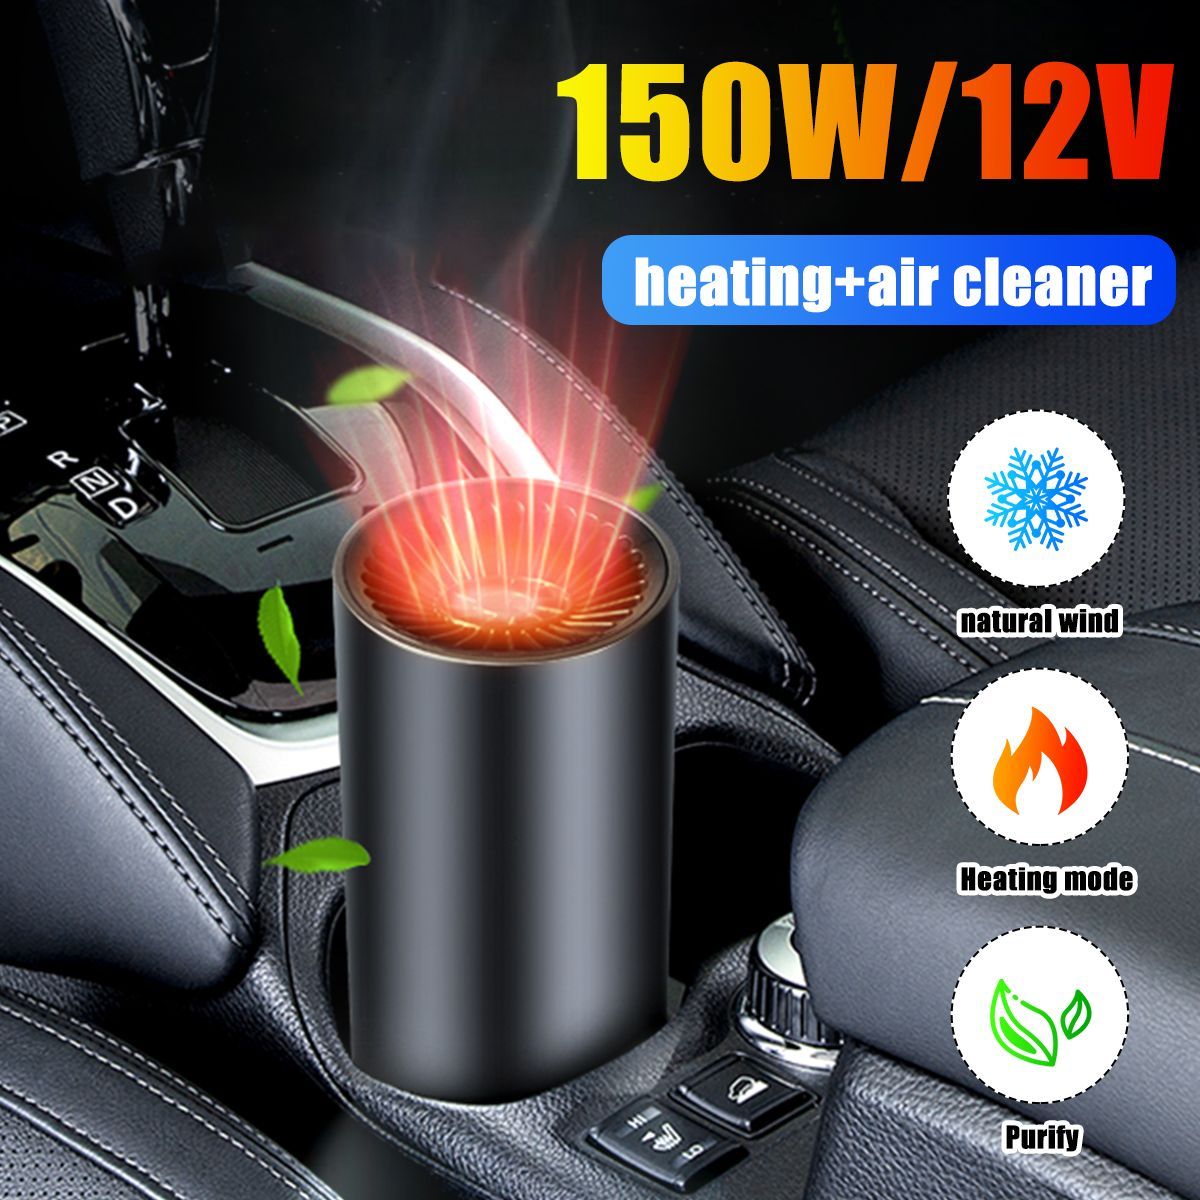 12V-150W-Mini-Portable-Car-Air-Purification-Heater-Demisting-Defroster-2-Gears-Wind-1740854